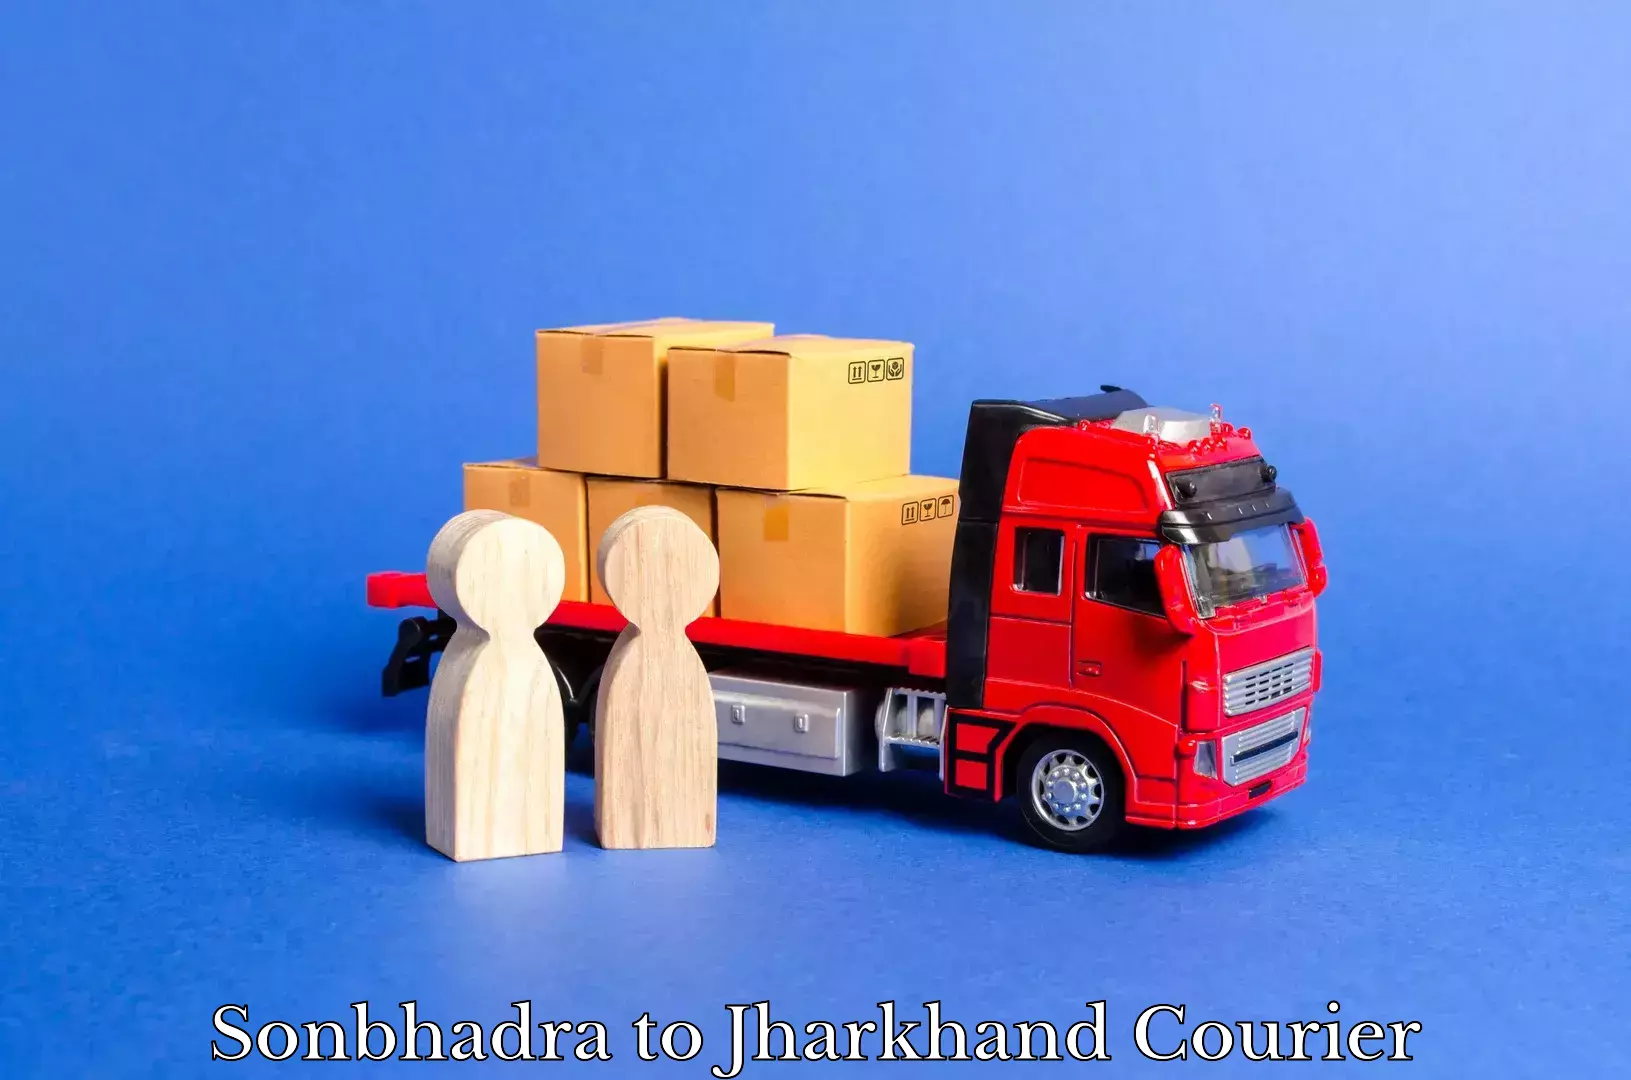 Courier service efficiency Sonbhadra to Jharkhand